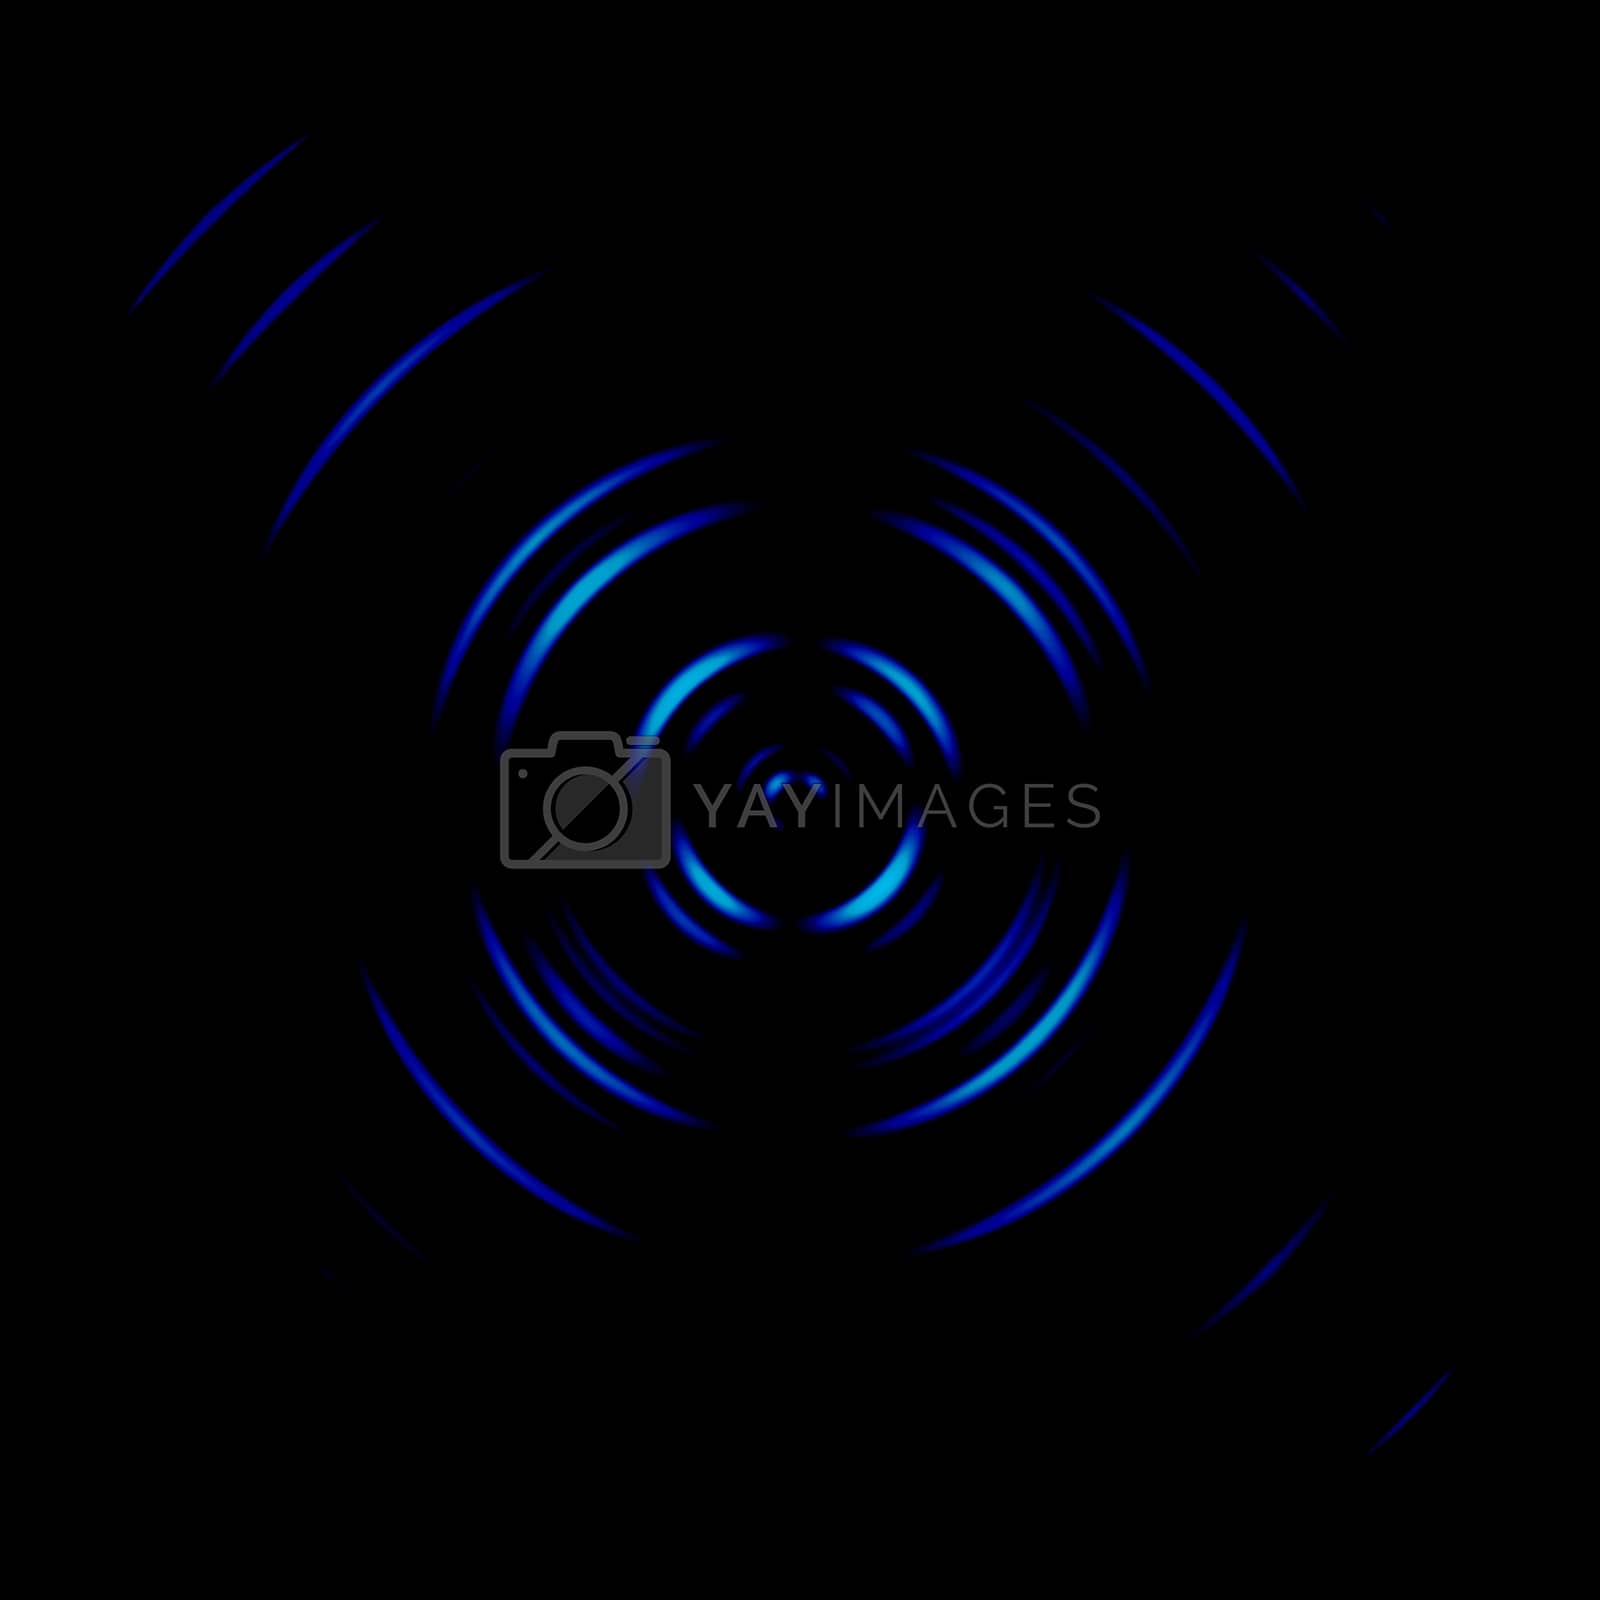 Royalty free image of Blue galaxy spiral or circle signal, abstract background by mouu007